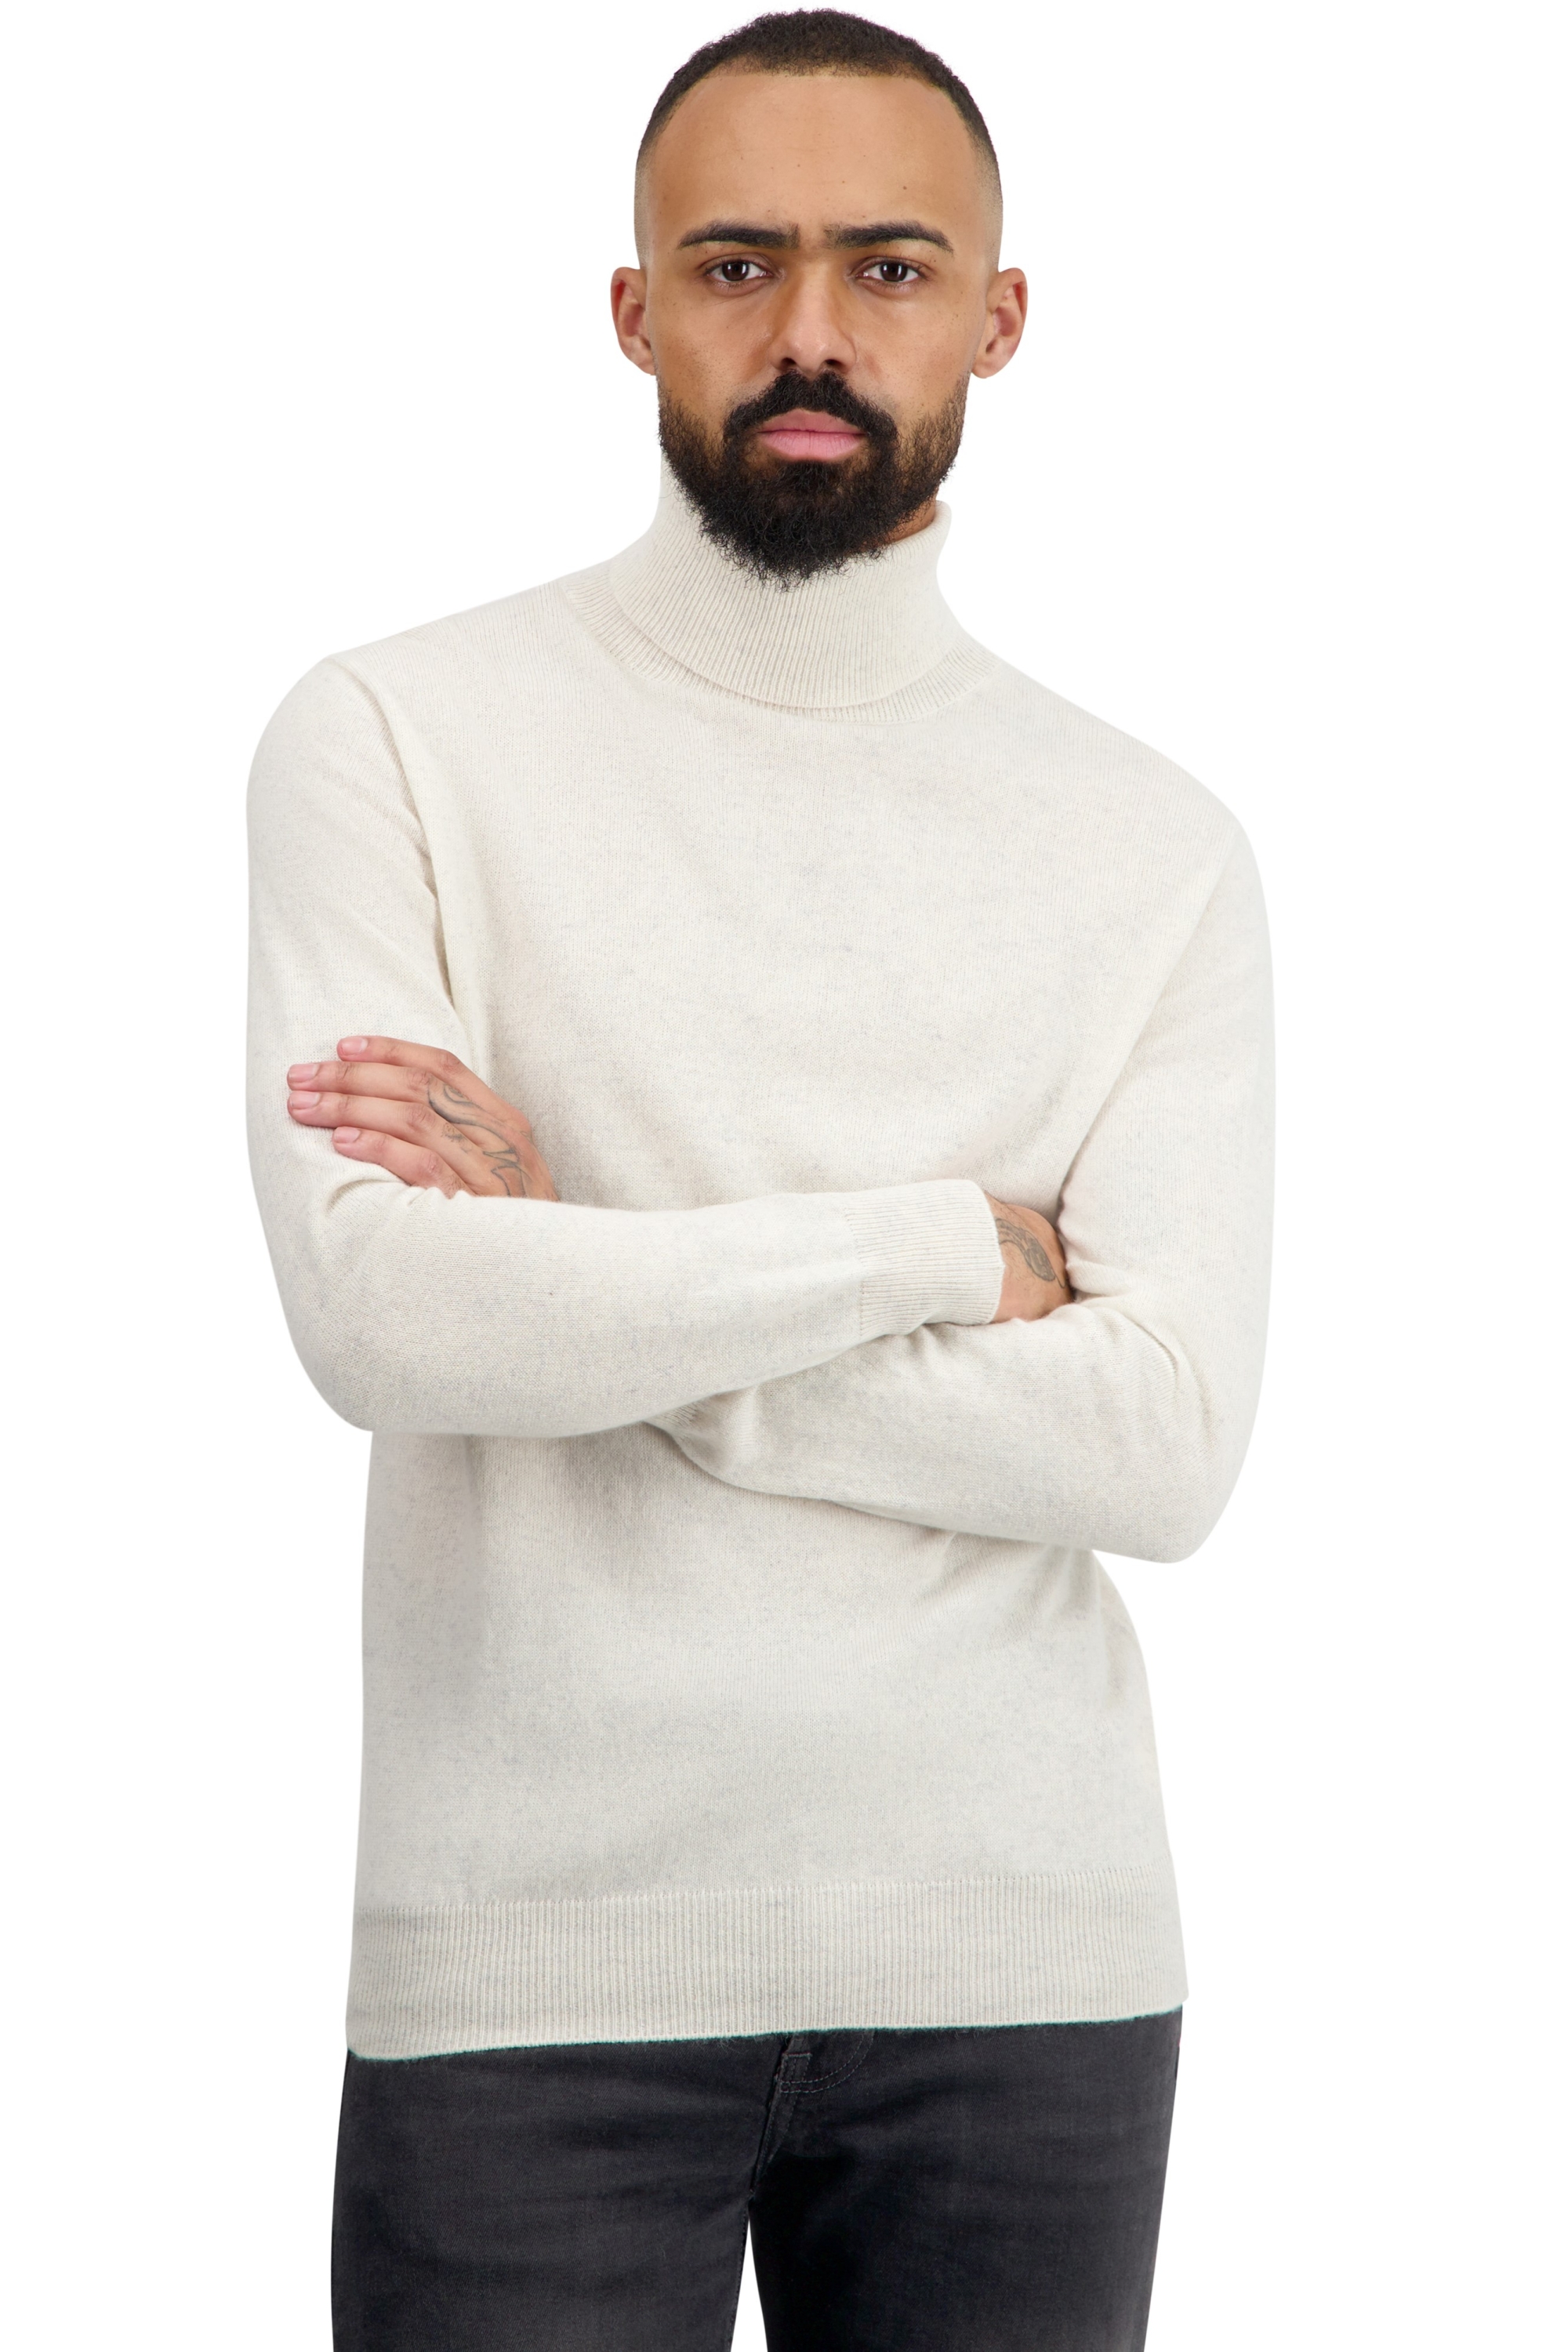 Cashmere men basic sweaters at low prices tarry first phantom l